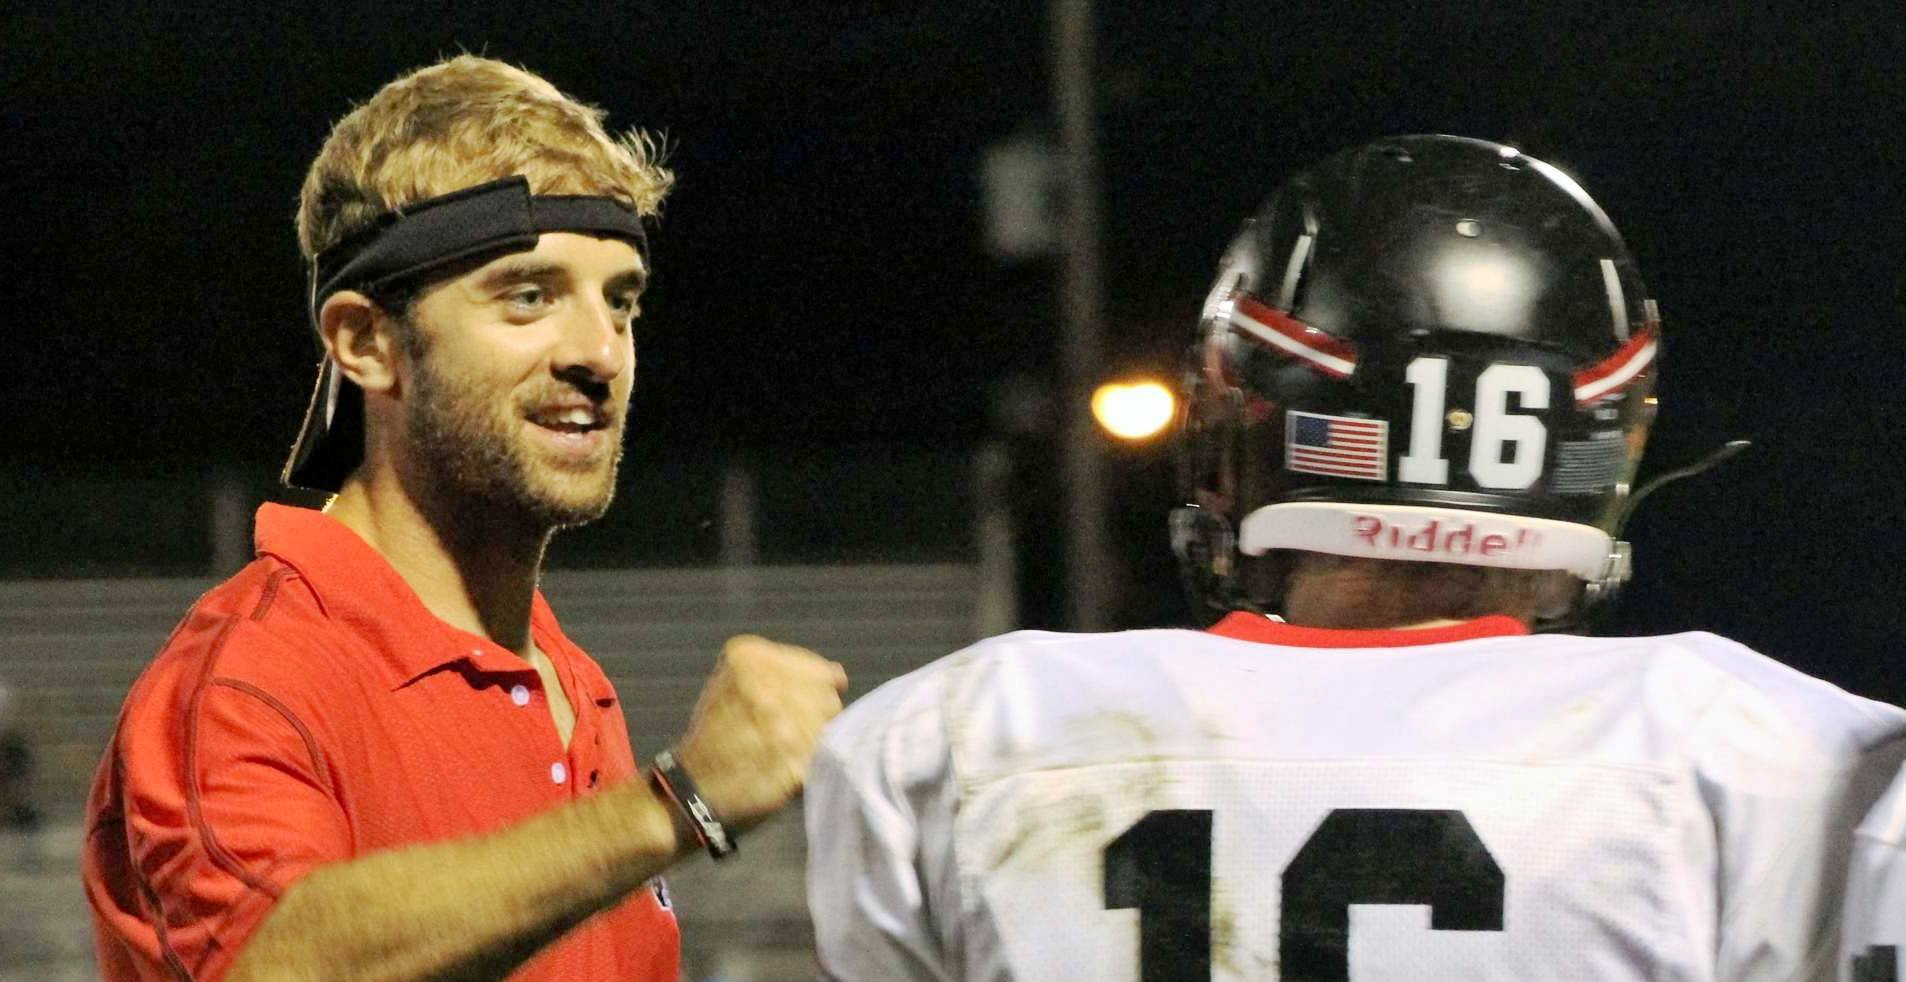 Nelson named Green Bay East football coach - The Press